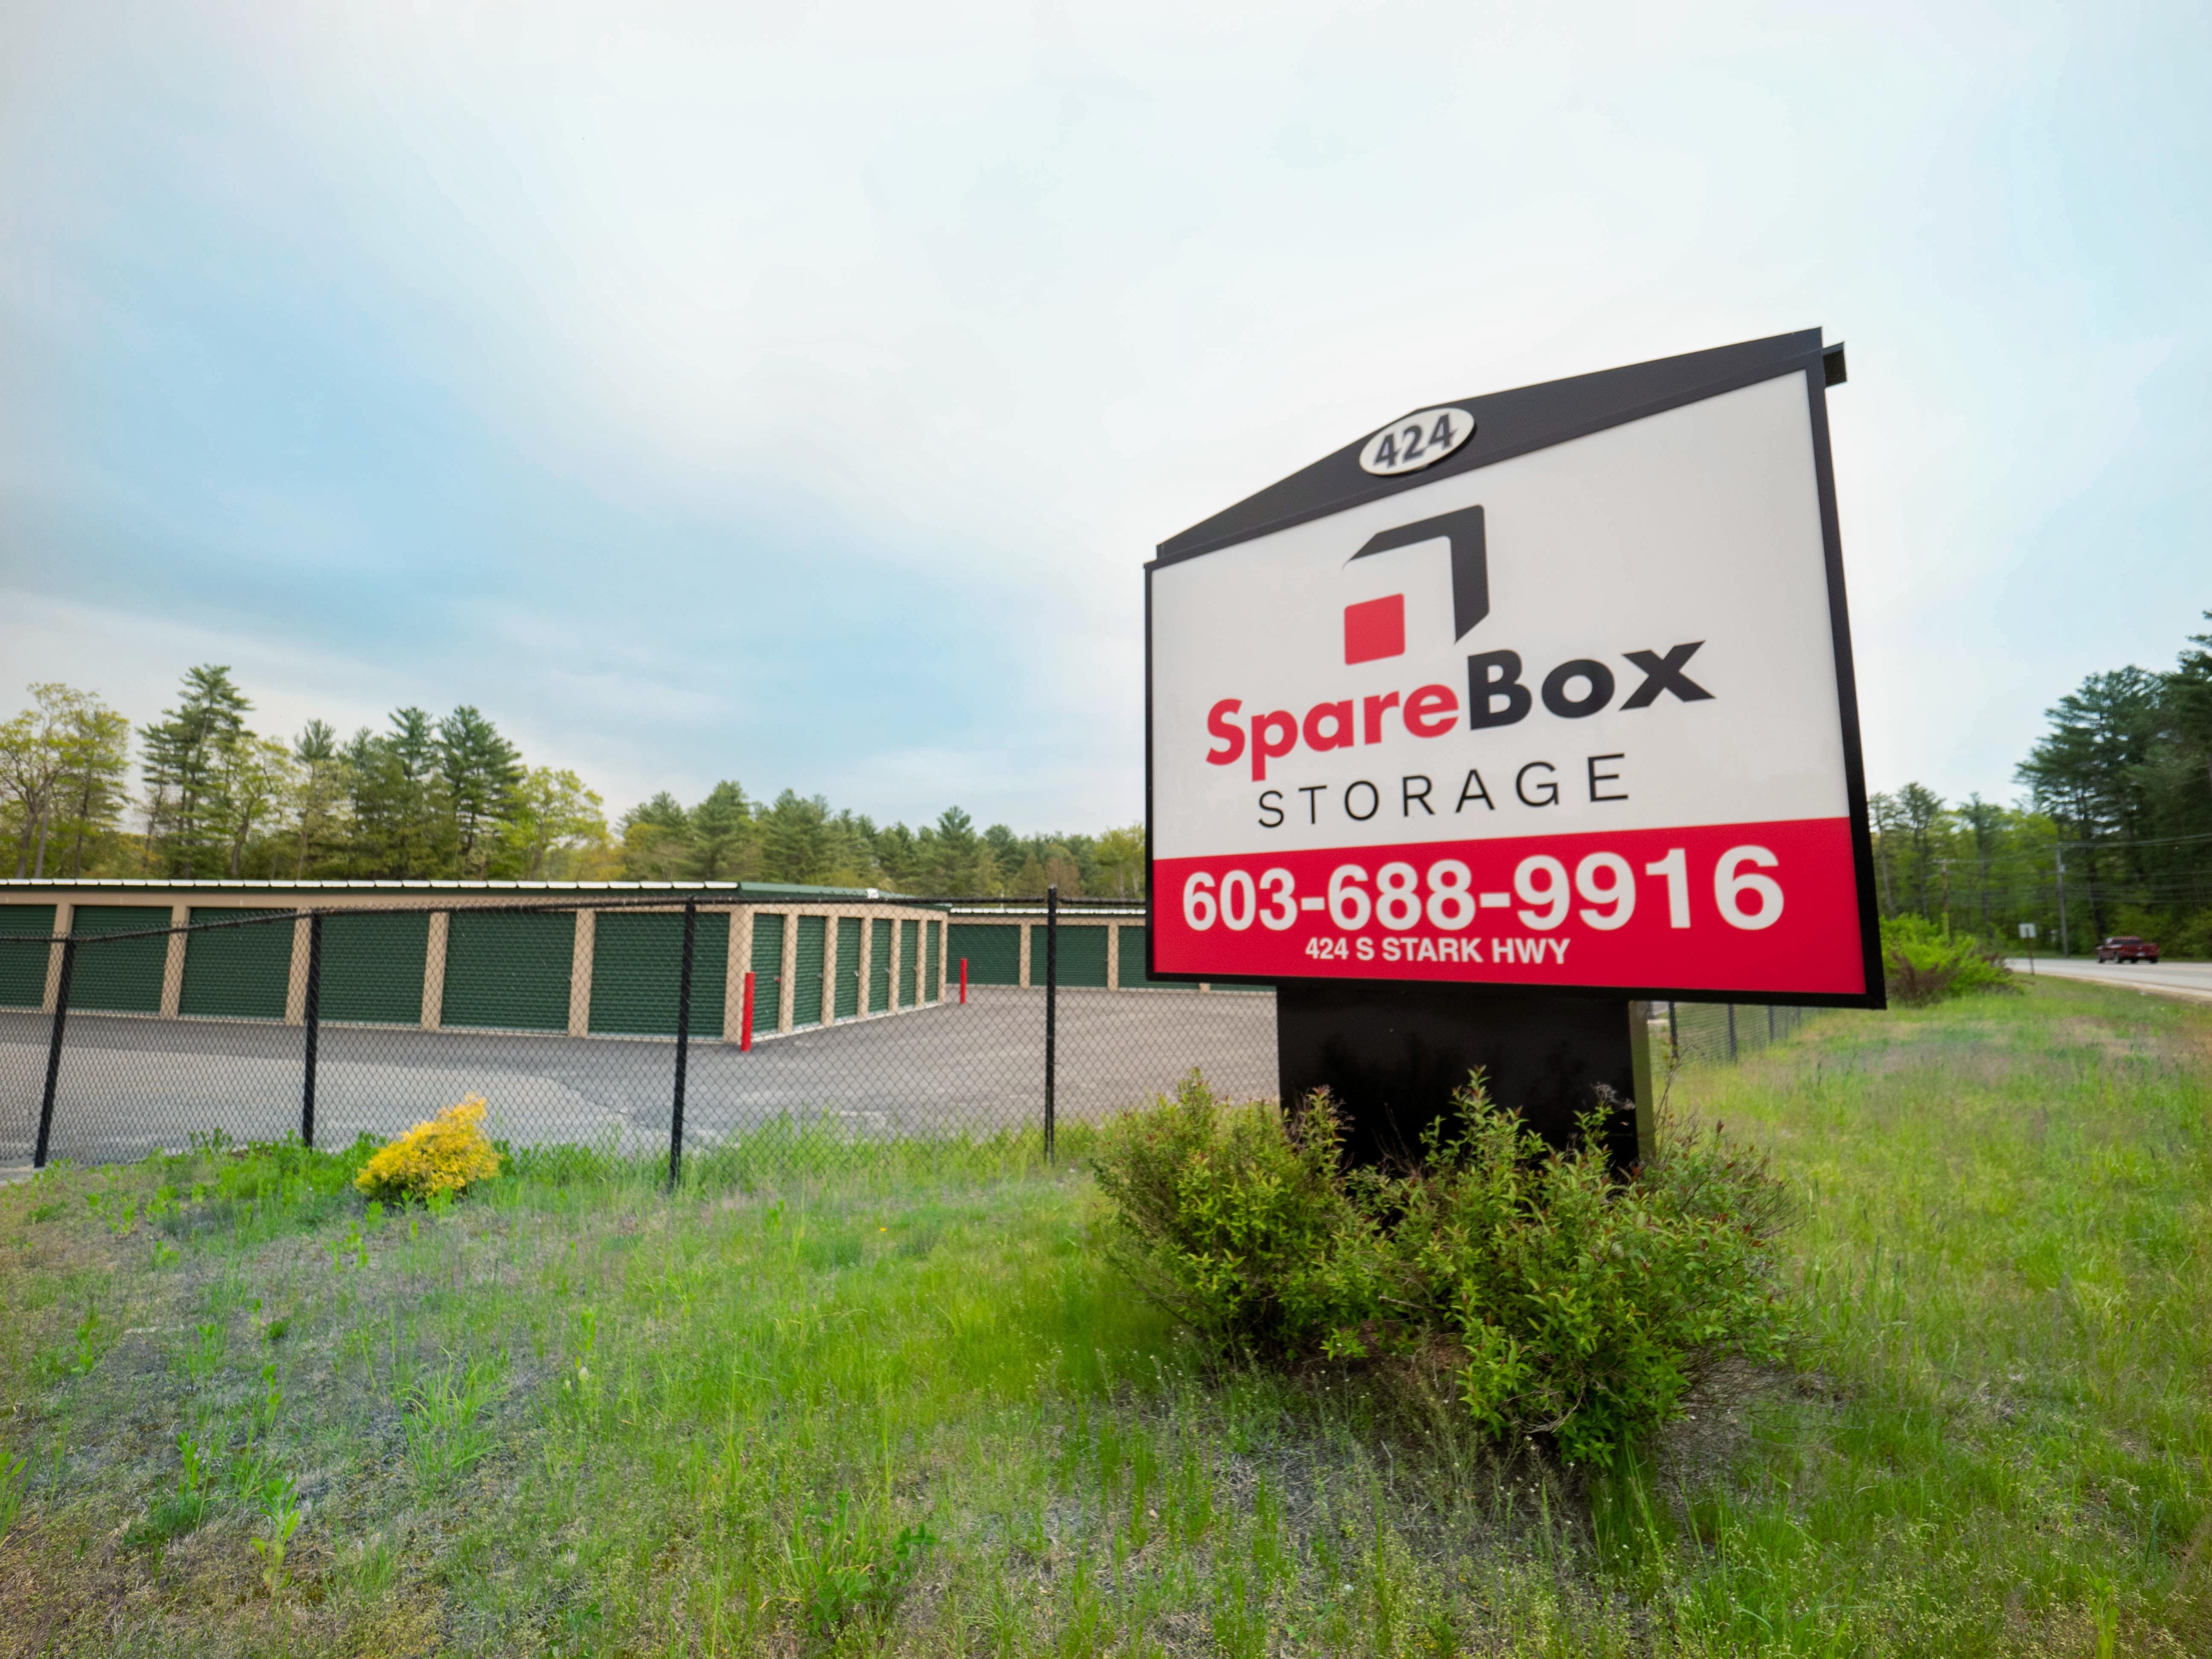 Outside view of SpareBox Storage facility in Weare